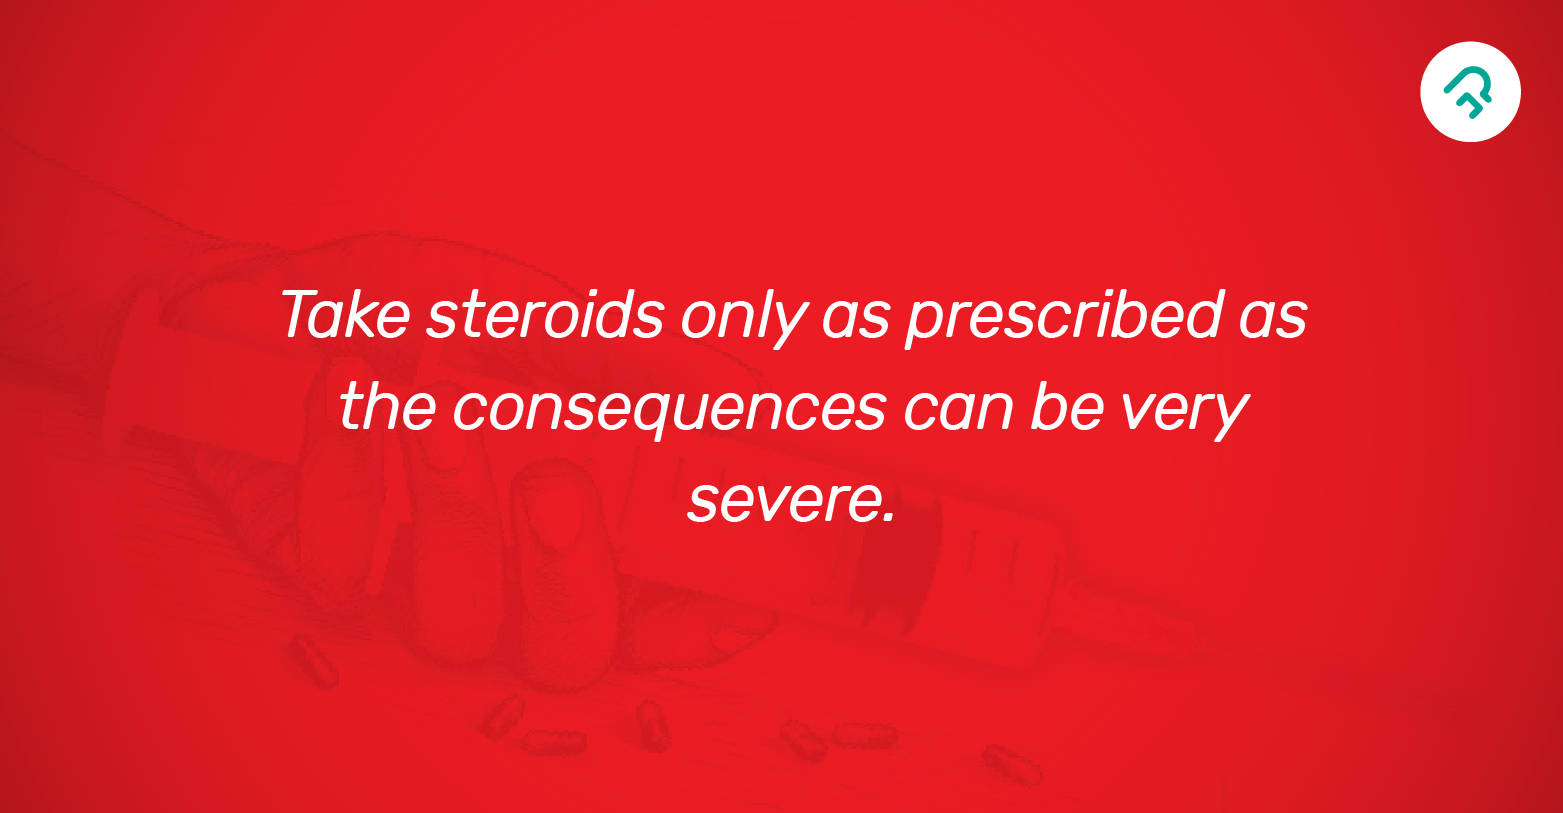 Steroids as medications